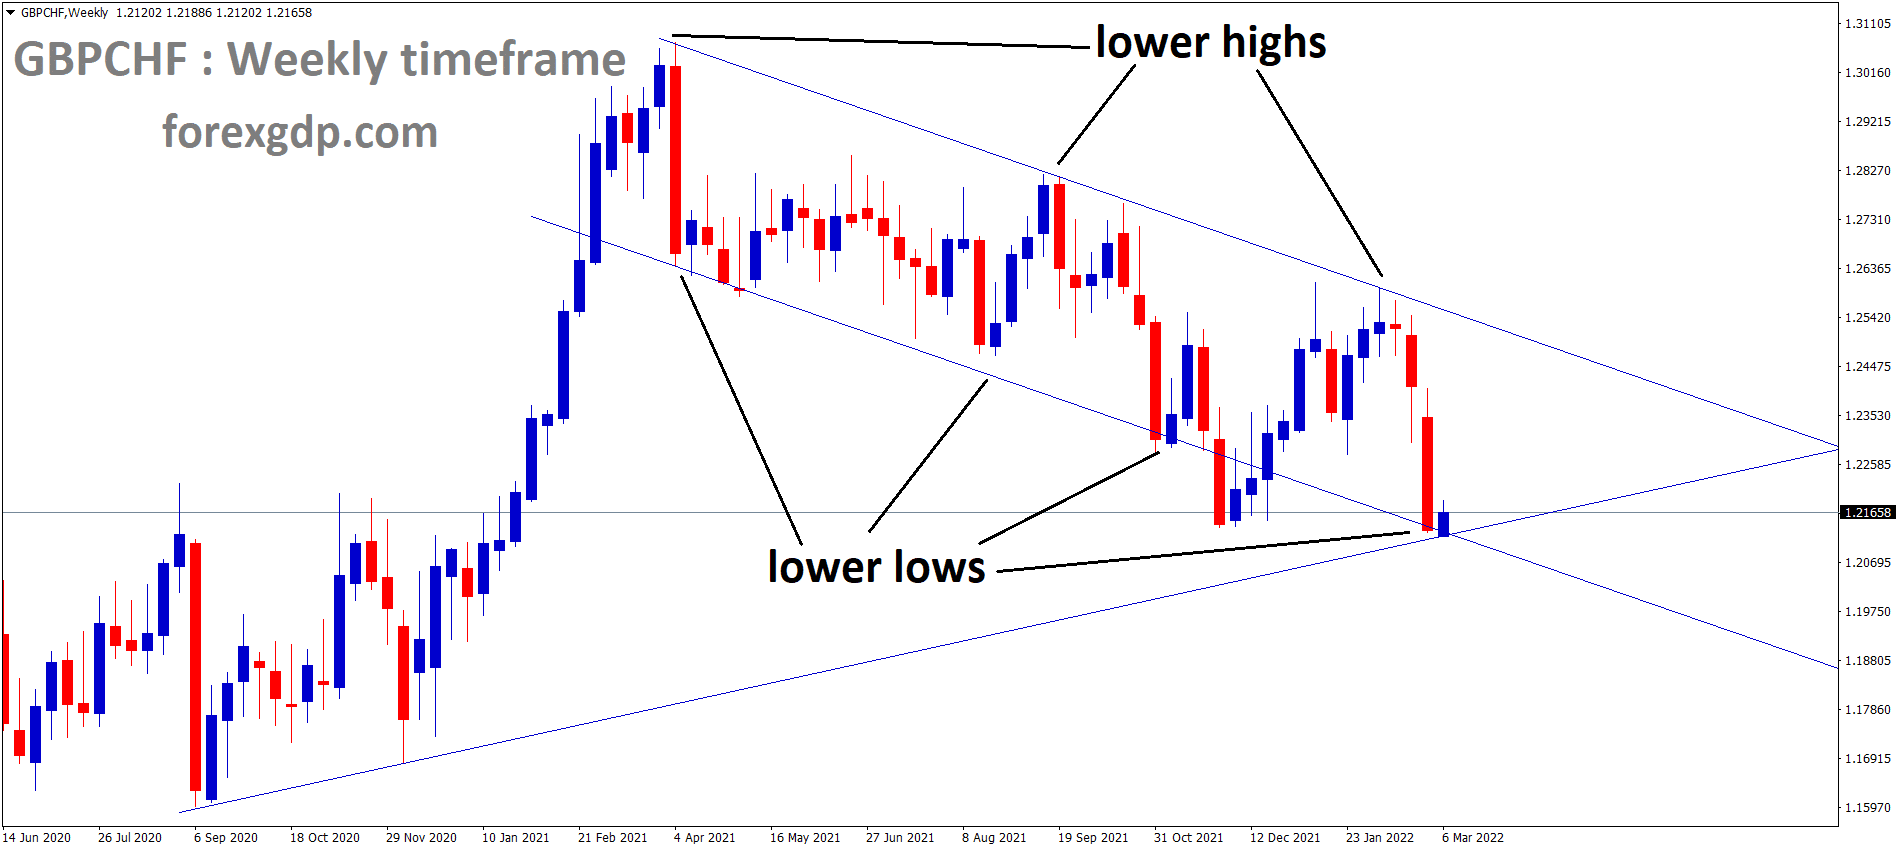 GBPCHF is moving in the Descending channel pattern and the market has reached the lower low area of the channel